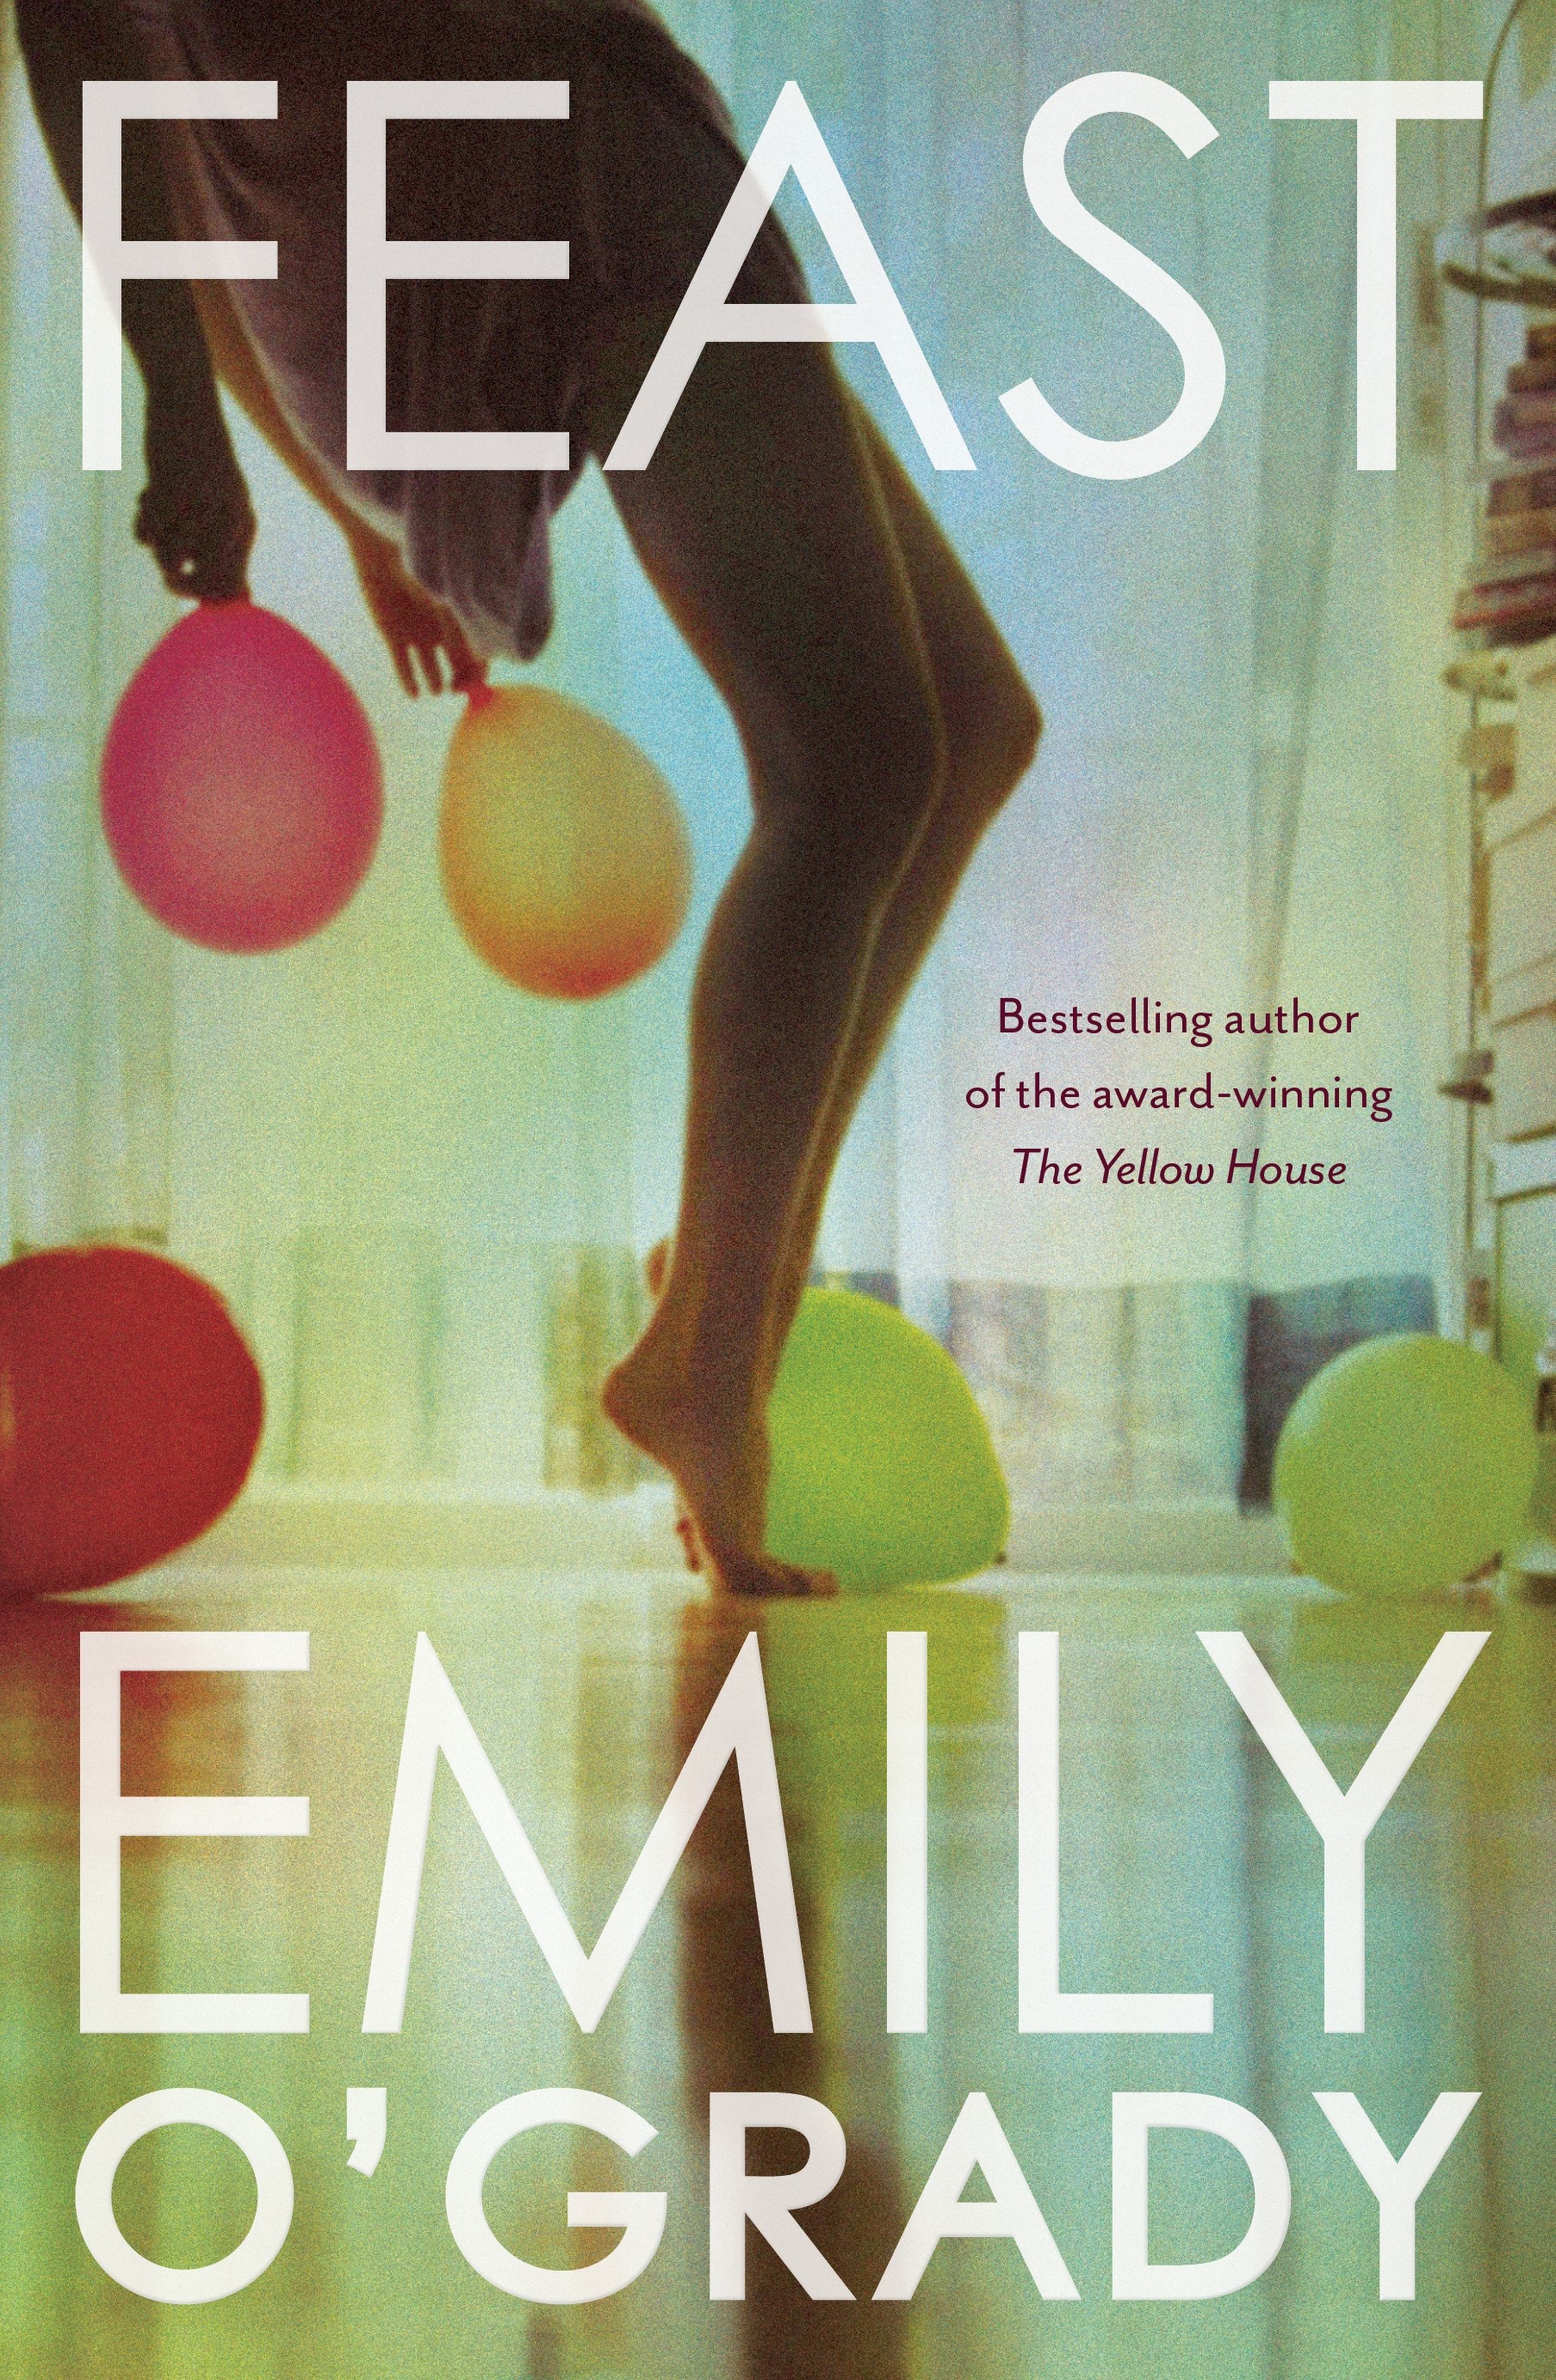 A book cover showing a photograph of a young woman's bare legs and balloons scattered about